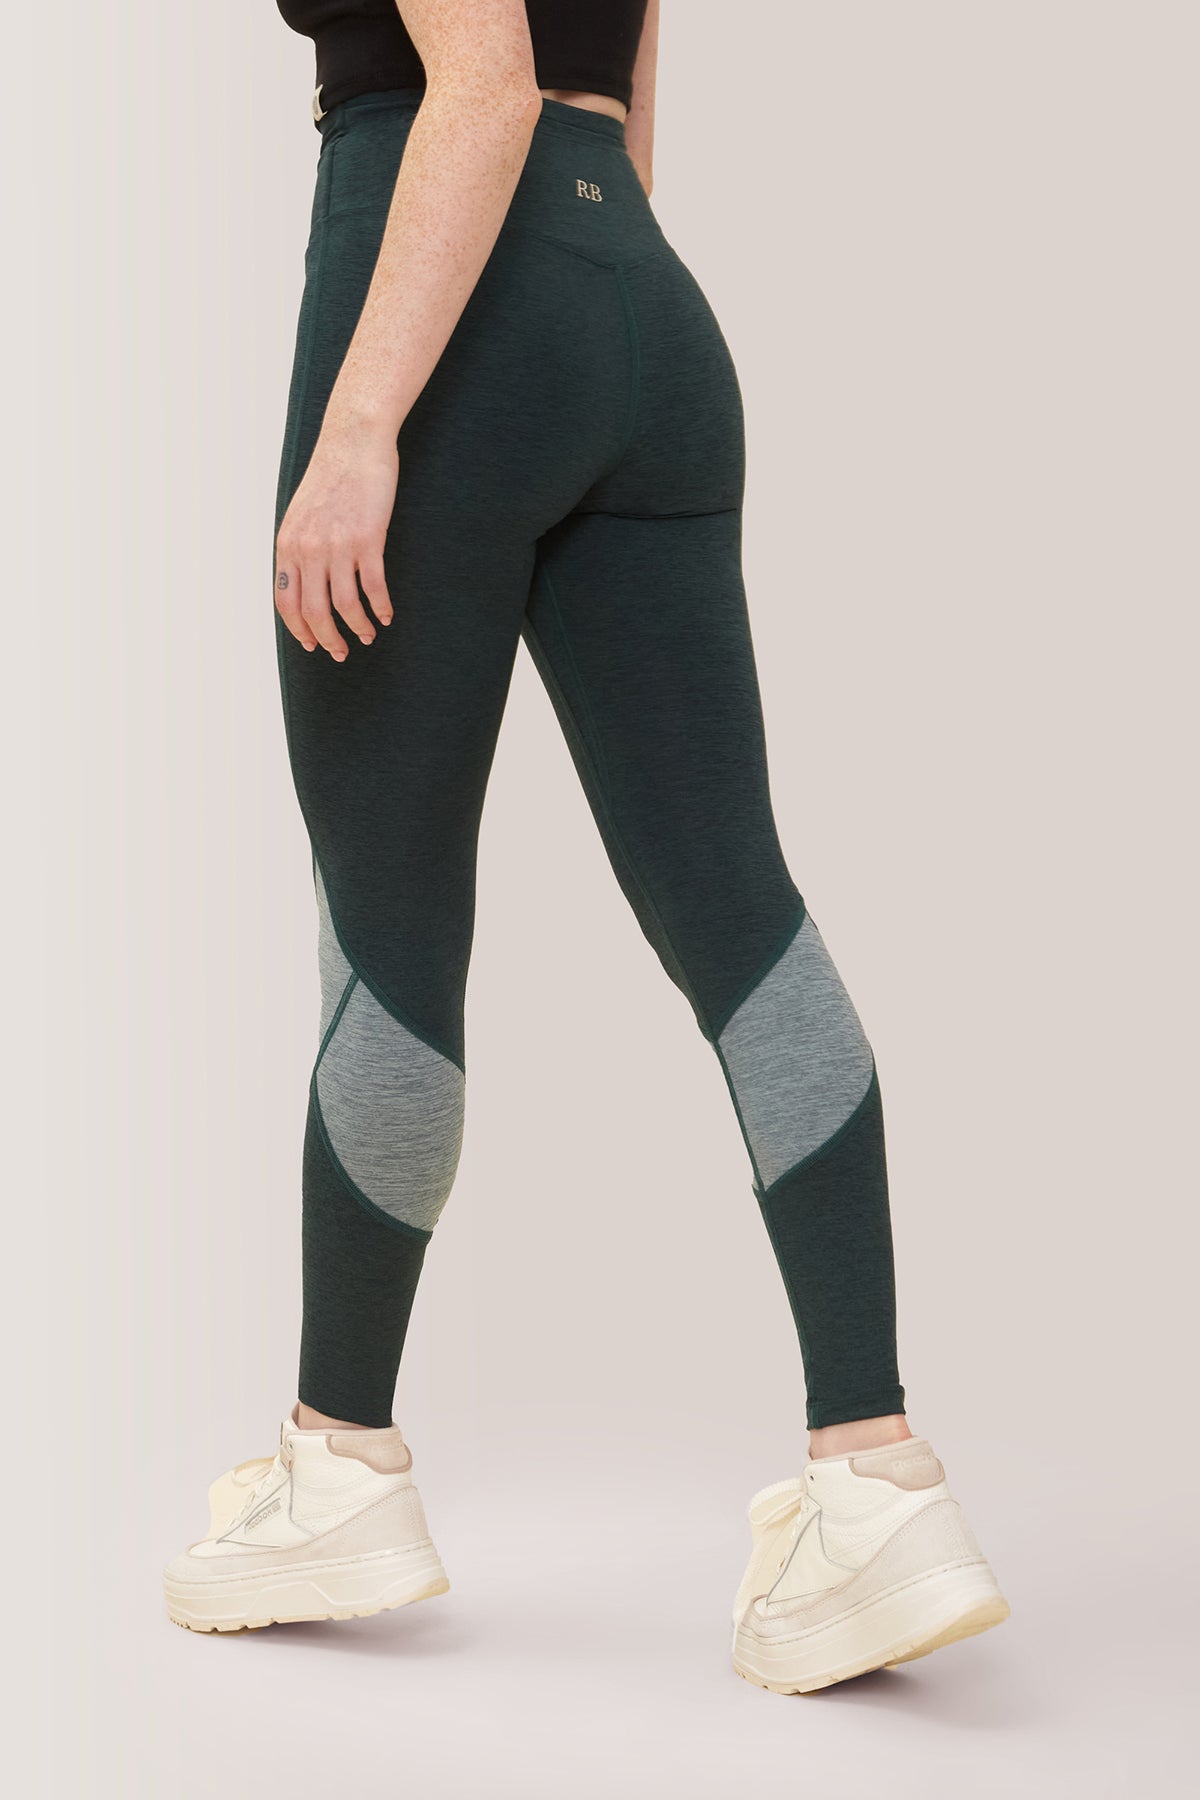 Femme qui porte les leggings Buttery Soft BFF High-Rise Keep Moving de Rose Boreal./ Women wearing the buttery soft BFF high-rise Keep Moving leggings from Rose Boreal. -Fern